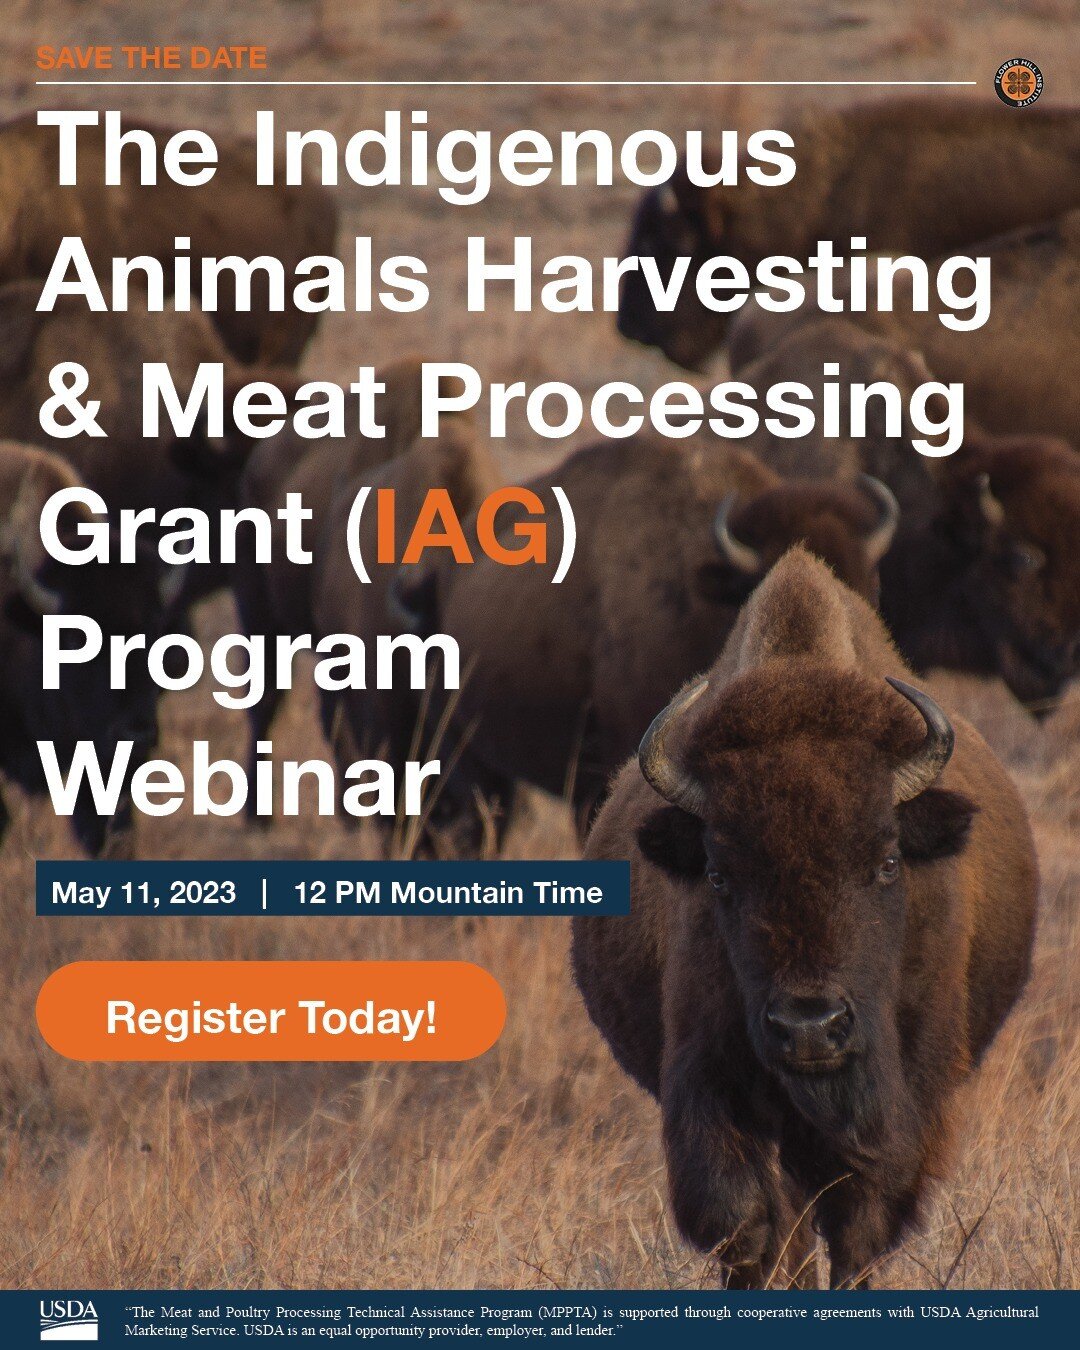 Flower Hill Institute presents The Indigenous Animals Harvesting and Meat Processing Grant (IAG) Program Webinar for Indigenous/ Native American meat processors. Join us on May 11, 2023, at 12 PM Mountain Time (2 PM Eastern Time) for an hour-long pre